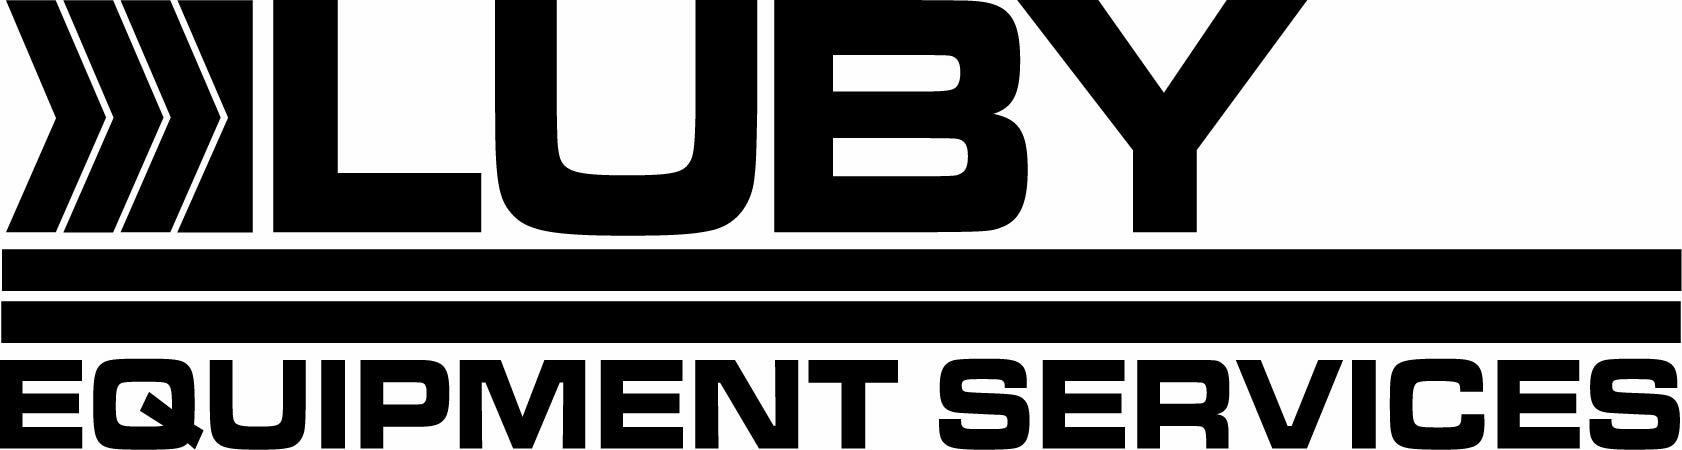 Luby Equipment Services company logo